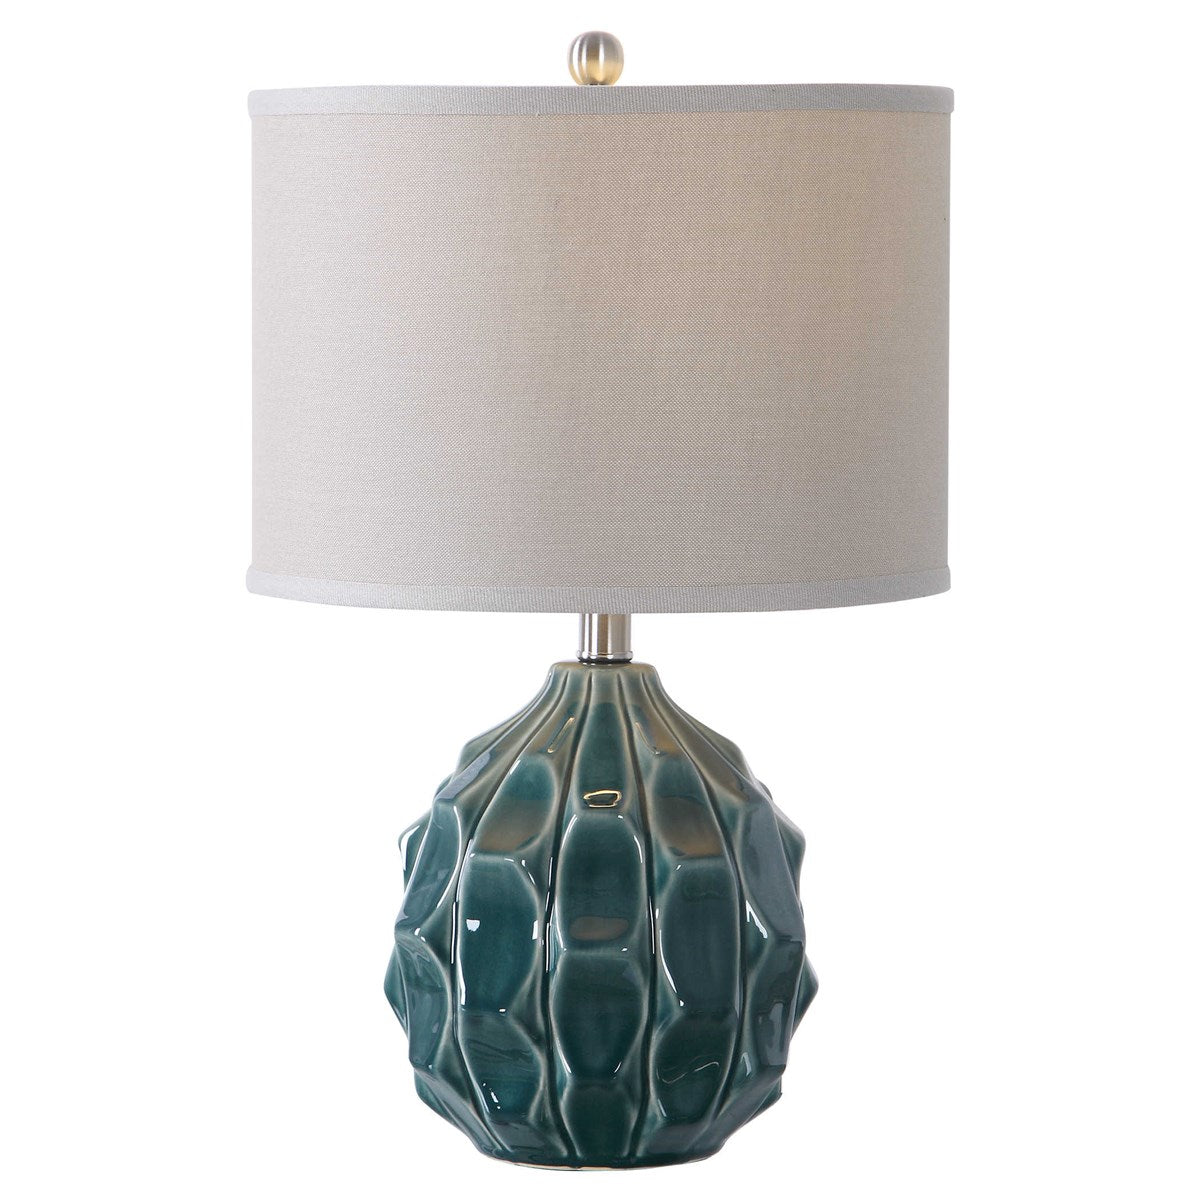 Scalloped Light Olive Gray Ceramic Table Lamp - 21-in - Mellow Monkey